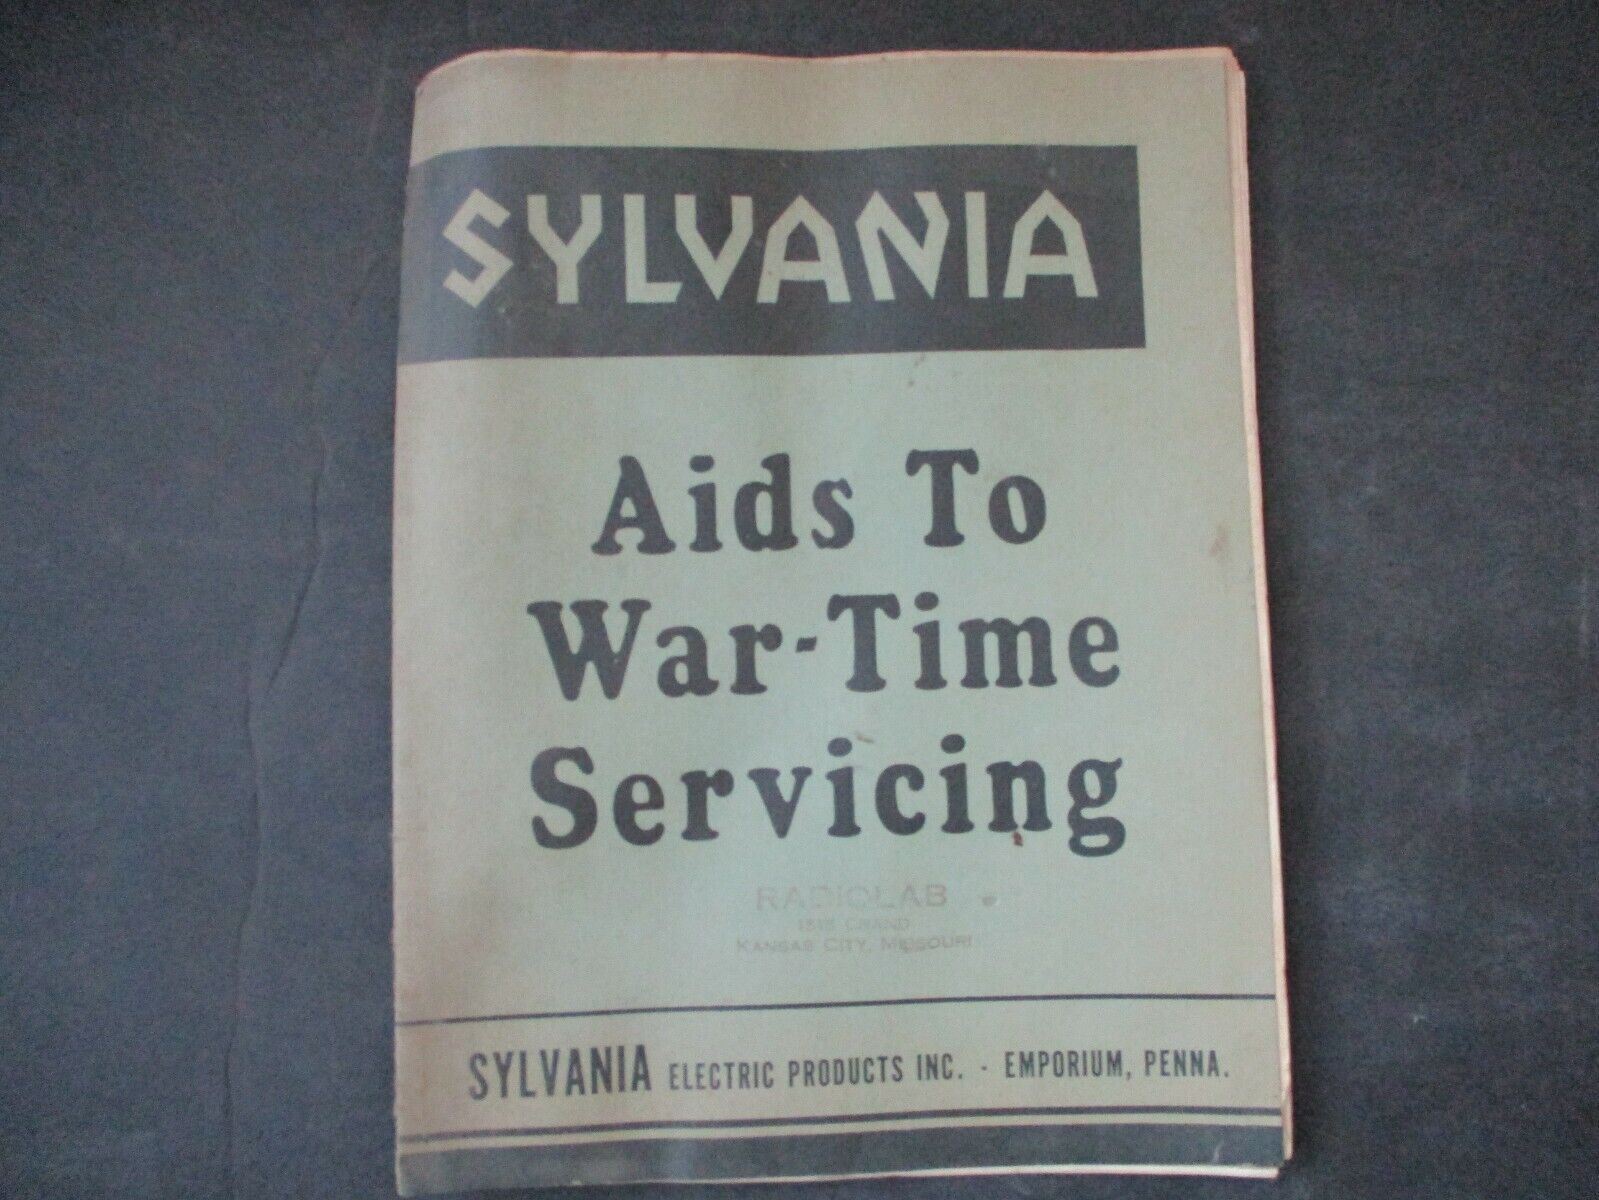 Sylvania Aids To War-Time Servicing guide